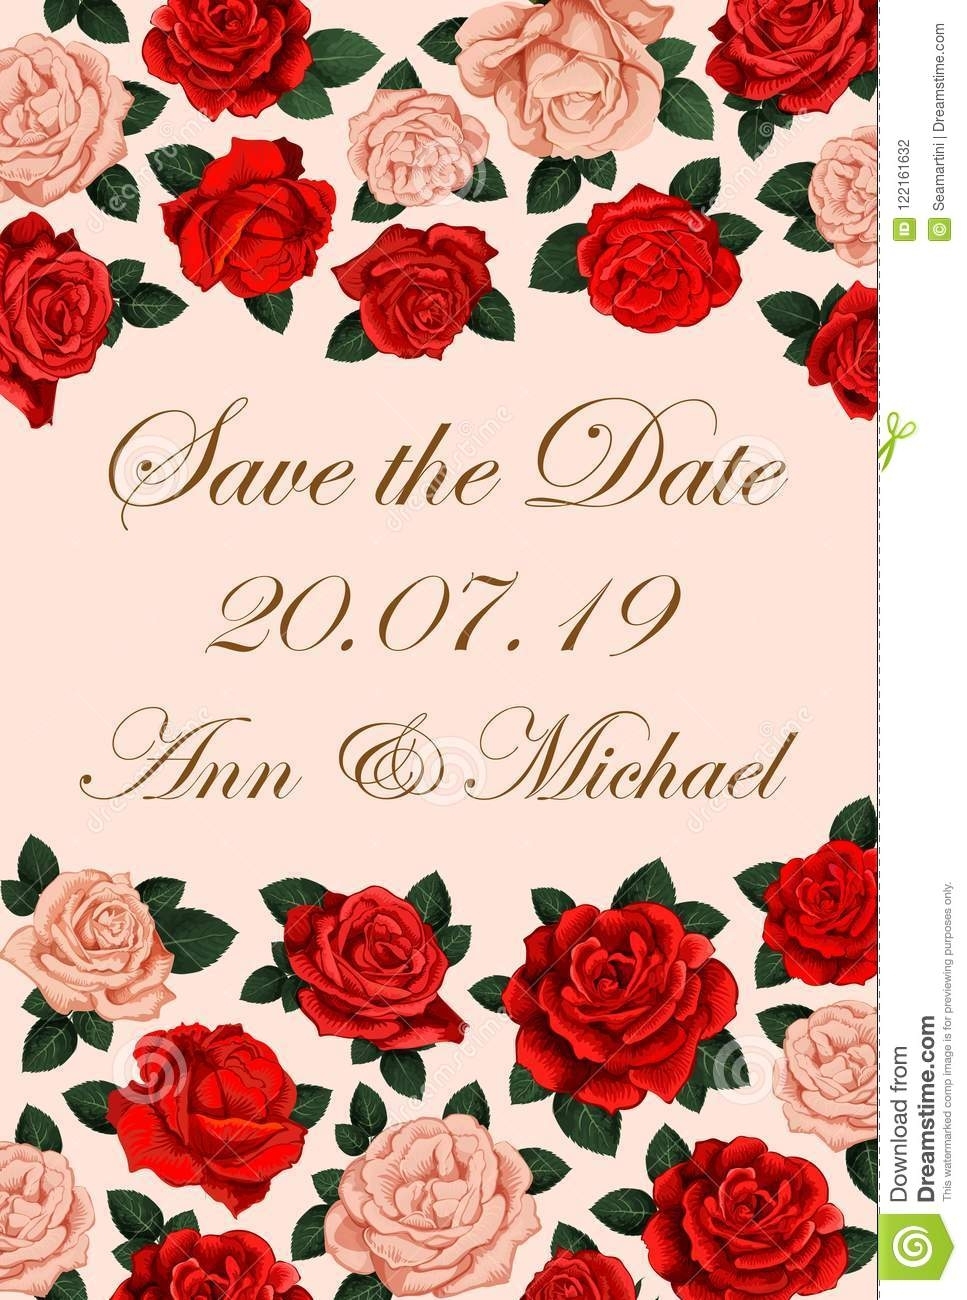 Save The Date Rose Flower Wedding Invitation Stock Vector within Save The Date Banner Template